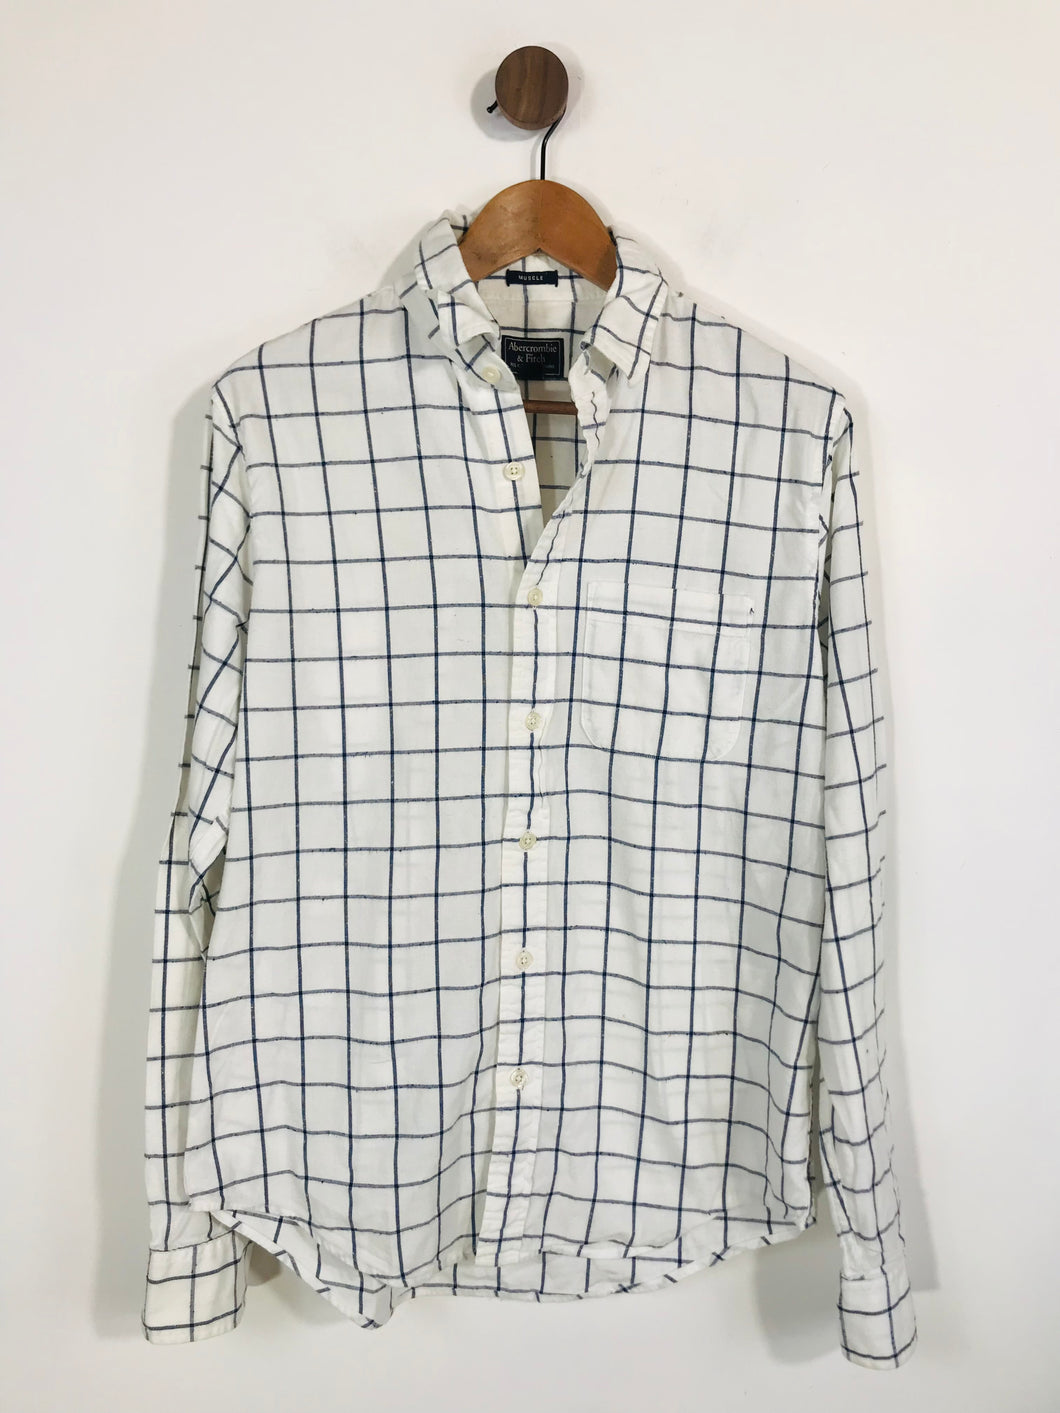 Abercrombie & Fitch Men's Check Flannel Button-Up Shirt | M | White